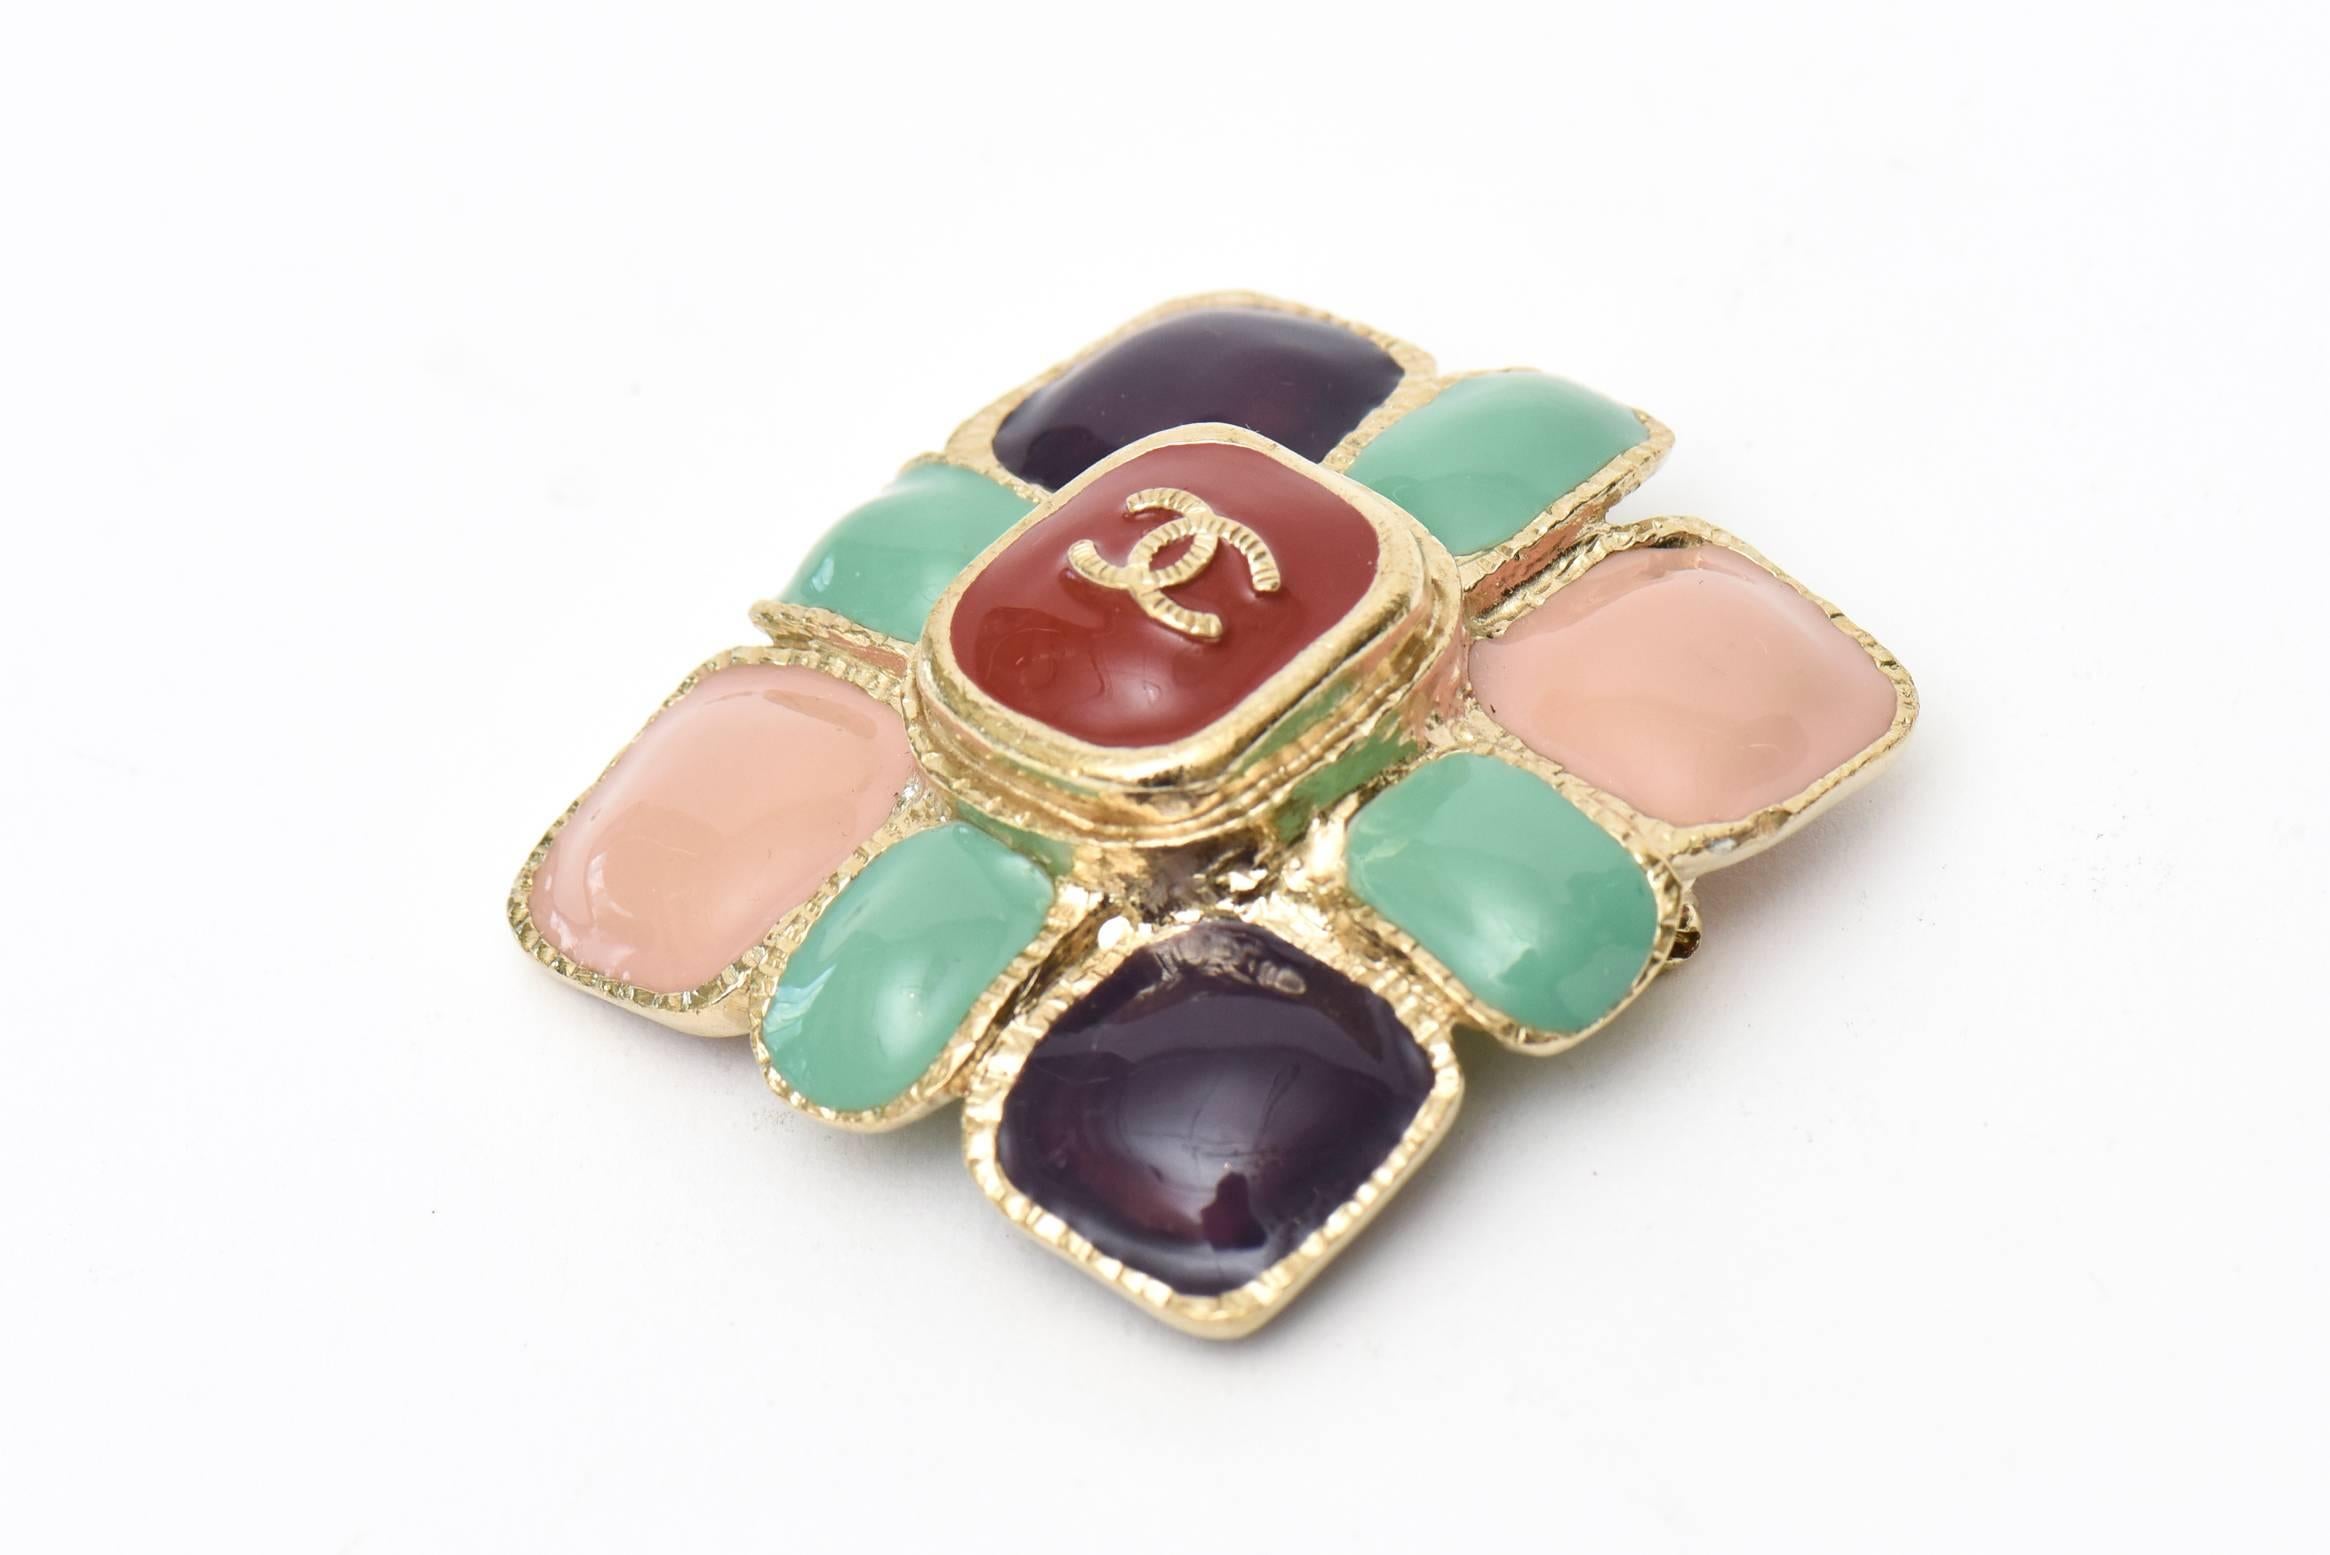 This hallmarked chic Chanel multi color pin was for the autumn 2008 collection. It has beautiful subtle colors of purple, blush pink, sage green and rust red admit the gold plated metal. It is signed Made In France 08A.
This would be so beautiful on